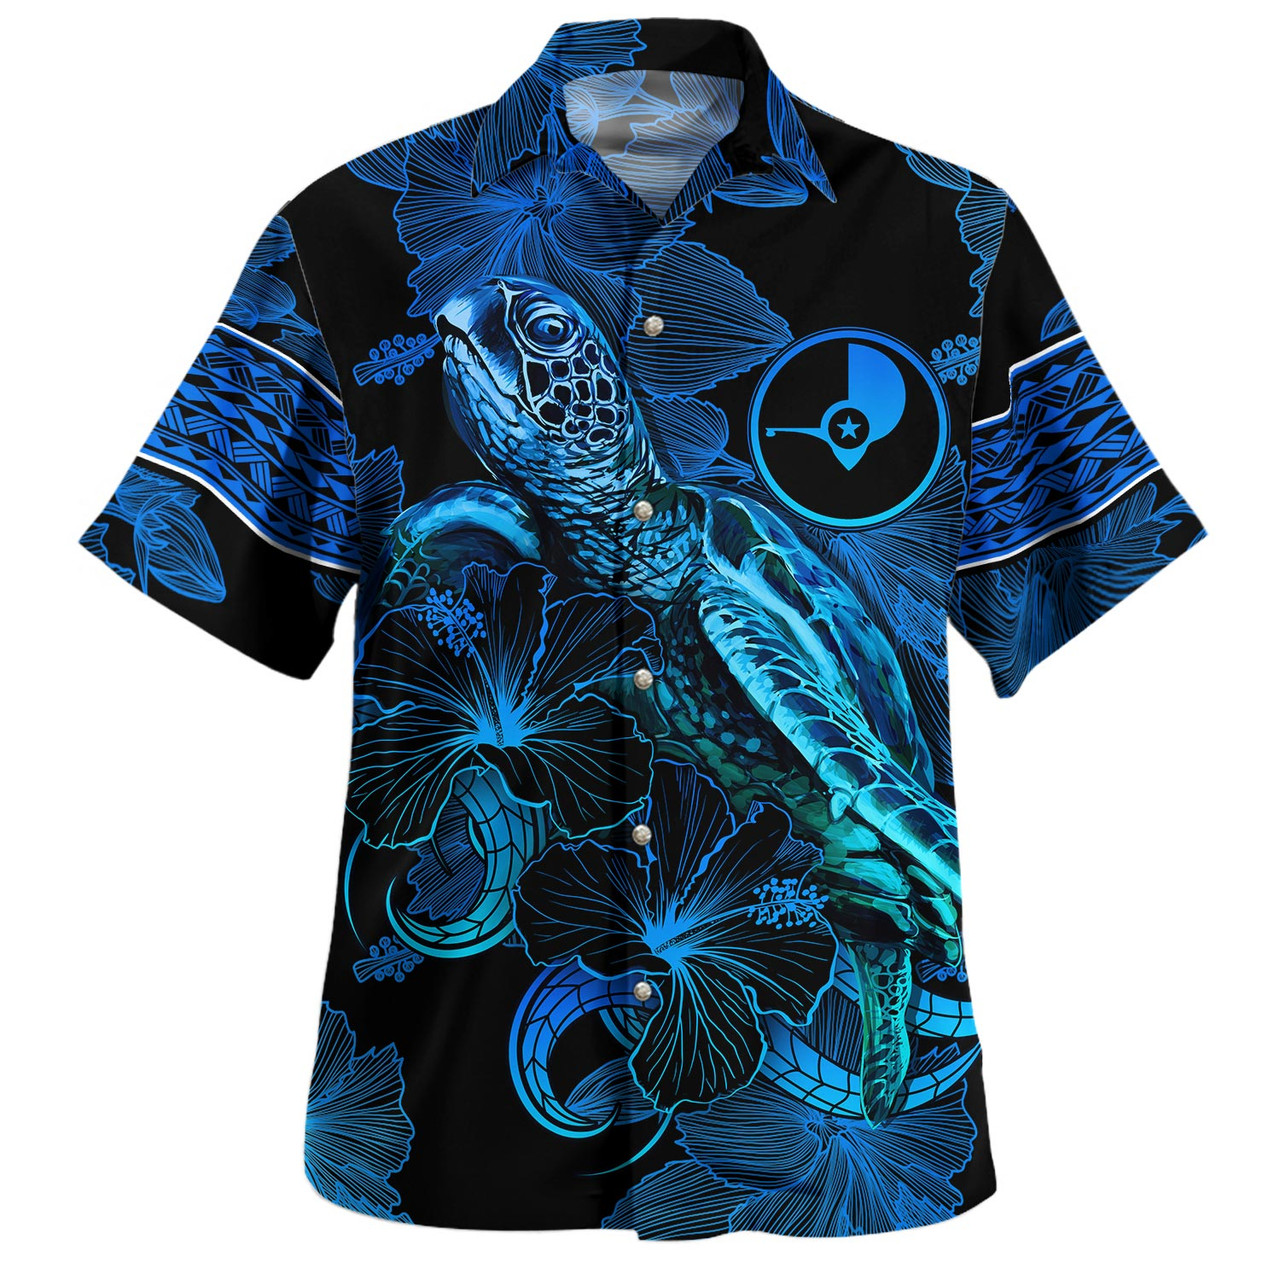 Yap State Combo Short Sleeve Dress And Shirt Sea Turtle With Blooming Hibiscus Flowers Tribal Blue